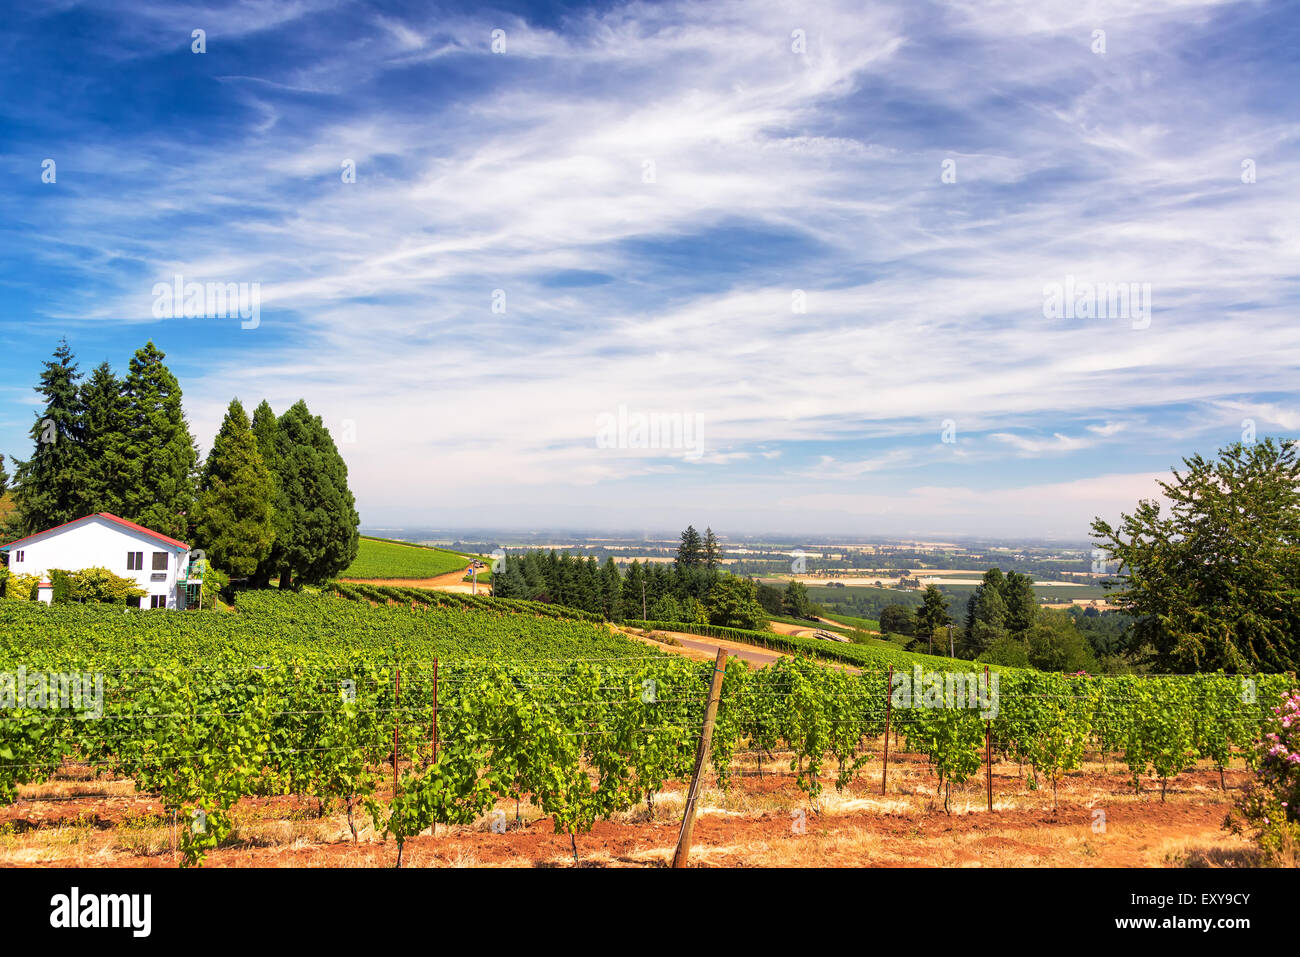 Vineyards in the Dundee Hills in Oregon with a beautiful dramatic sky Stock Photo